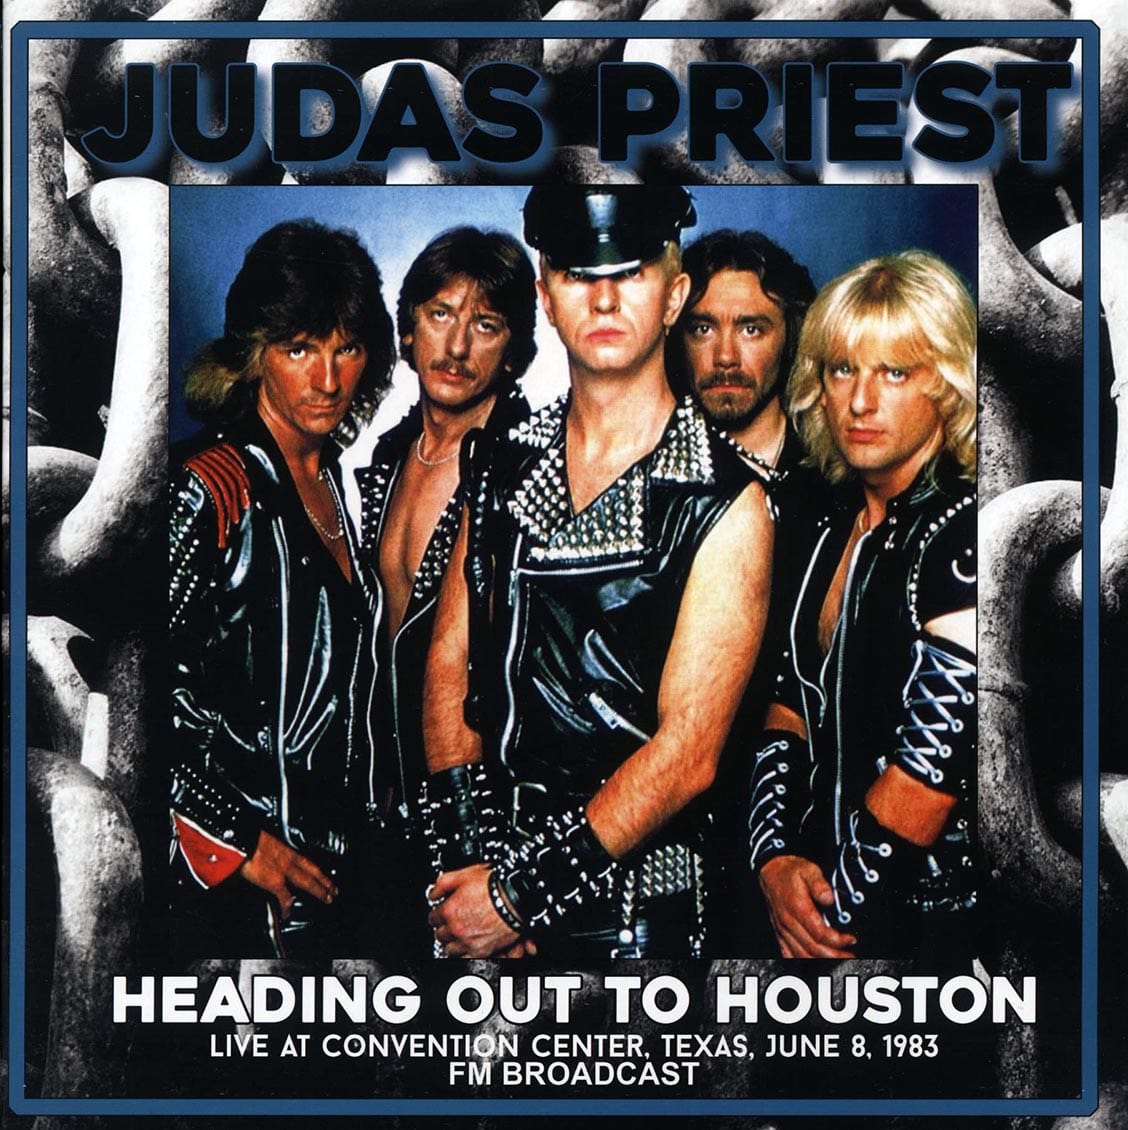 JUDAS PRIEST: Heading Out To Houston - Live at The Convention Center • Texas, June 8, 1983 FM Broadcast LP